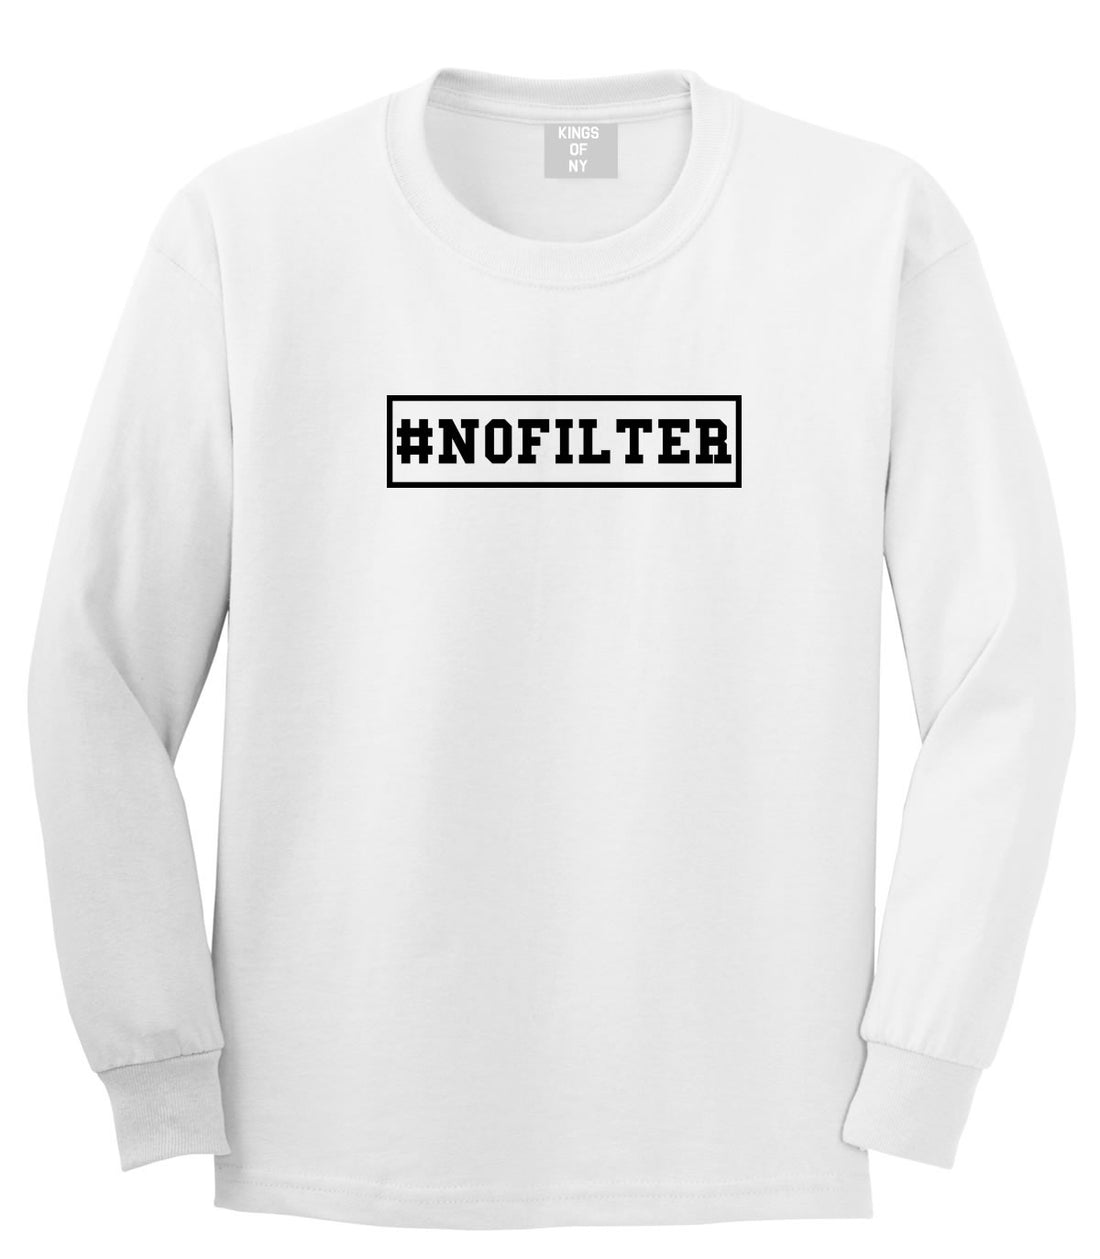 No Filter Selfie Long Sleeve T-Shirt in White By Kings Of NY